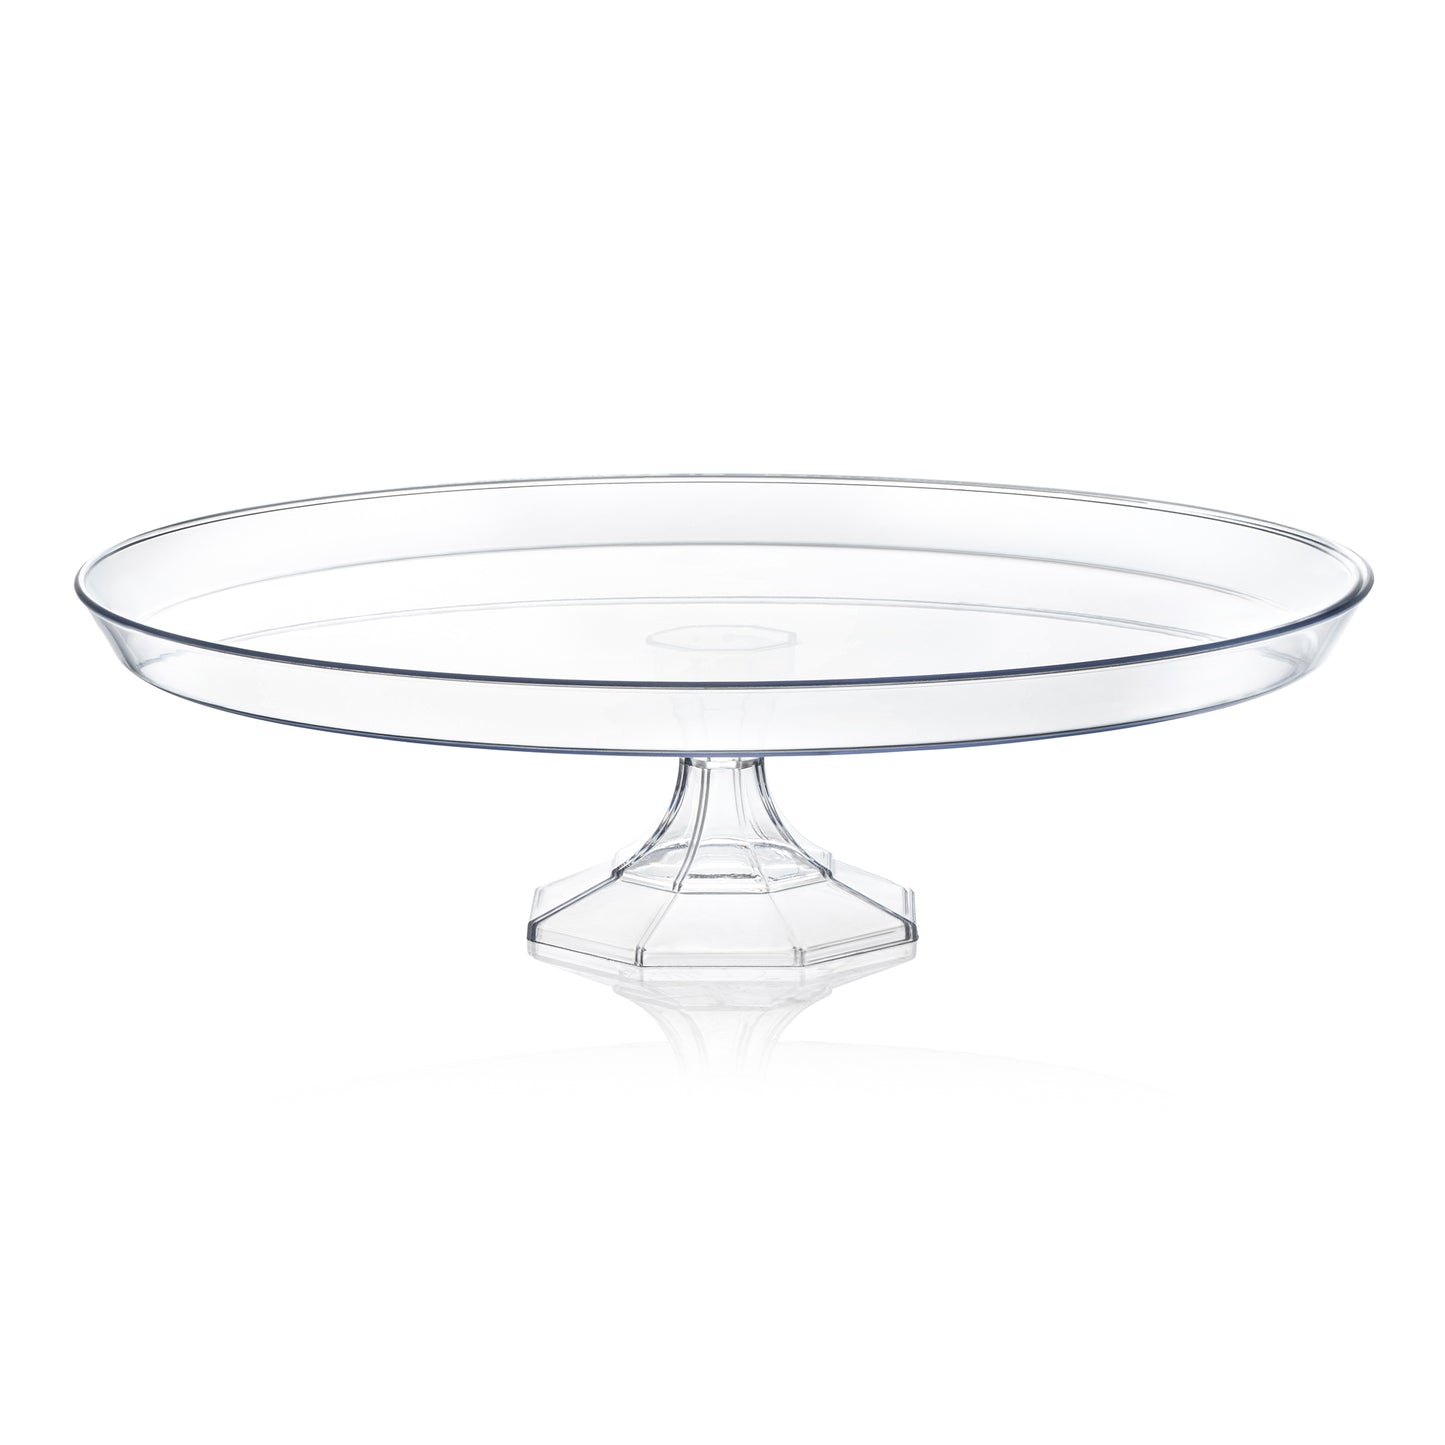 13" Clear Big Round Disposable Plastic Cake Stands